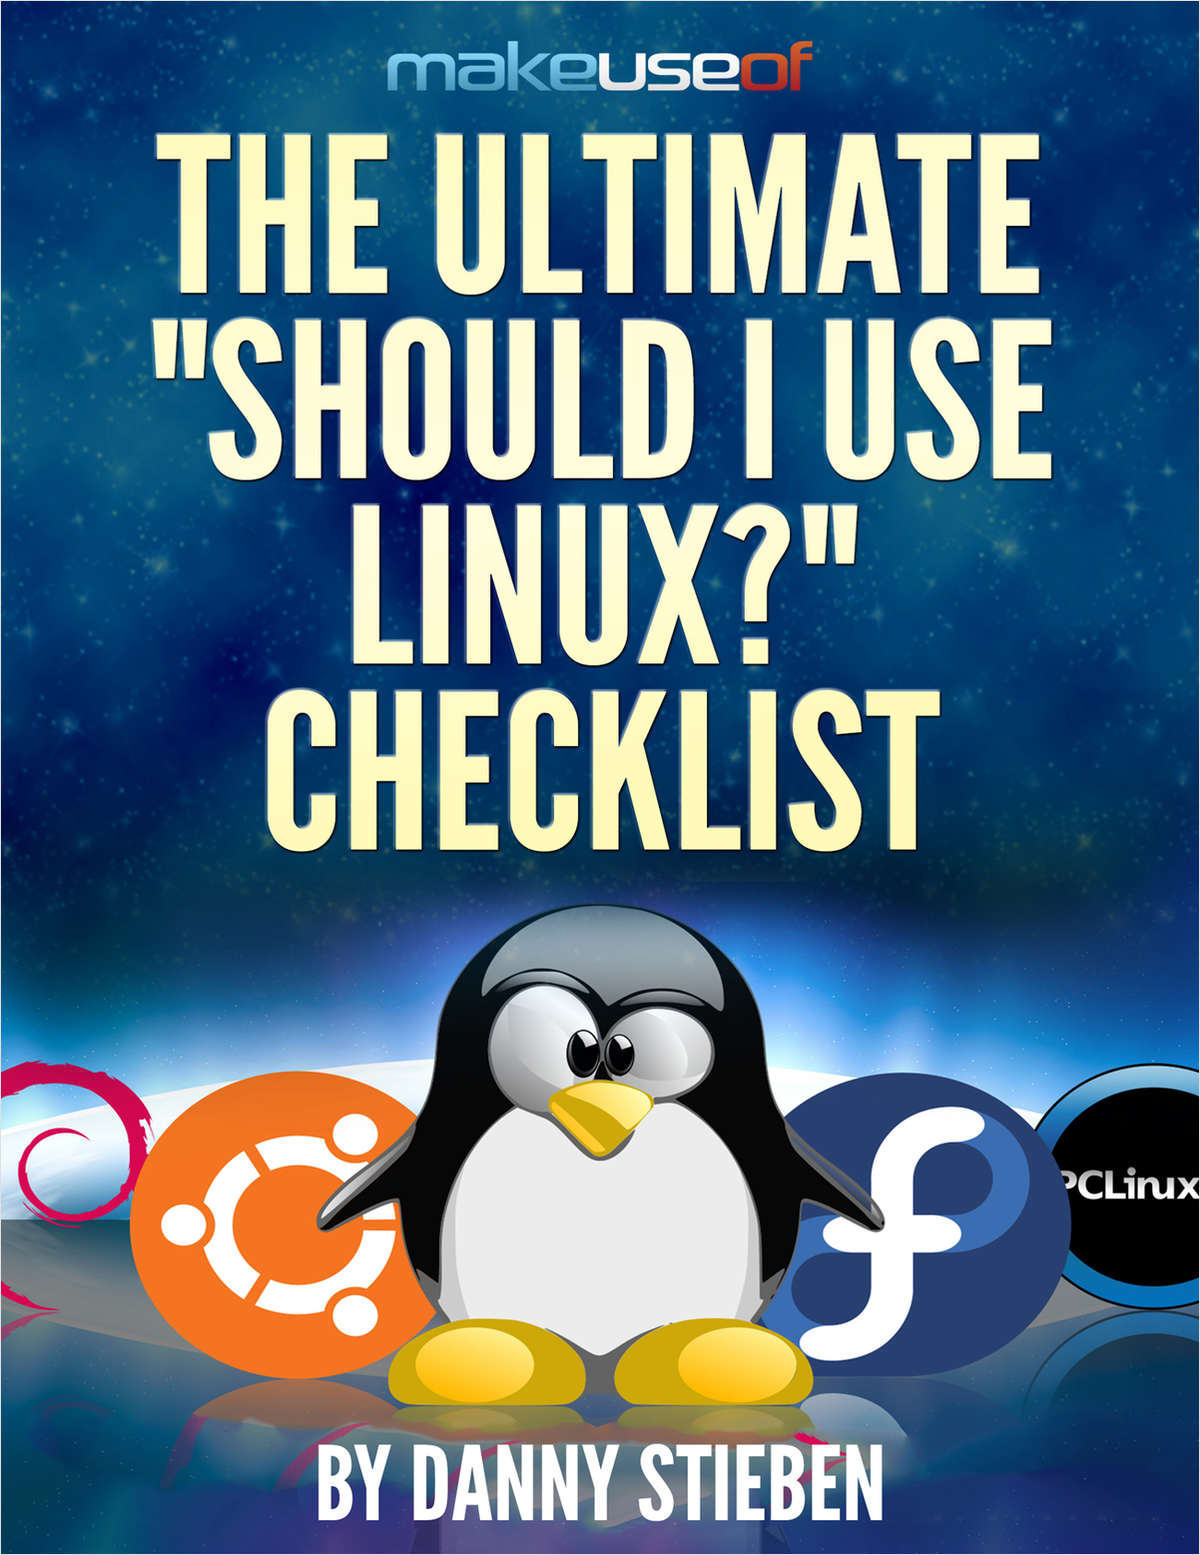 The Ultimate 'Should I Use Linux?' Checklist